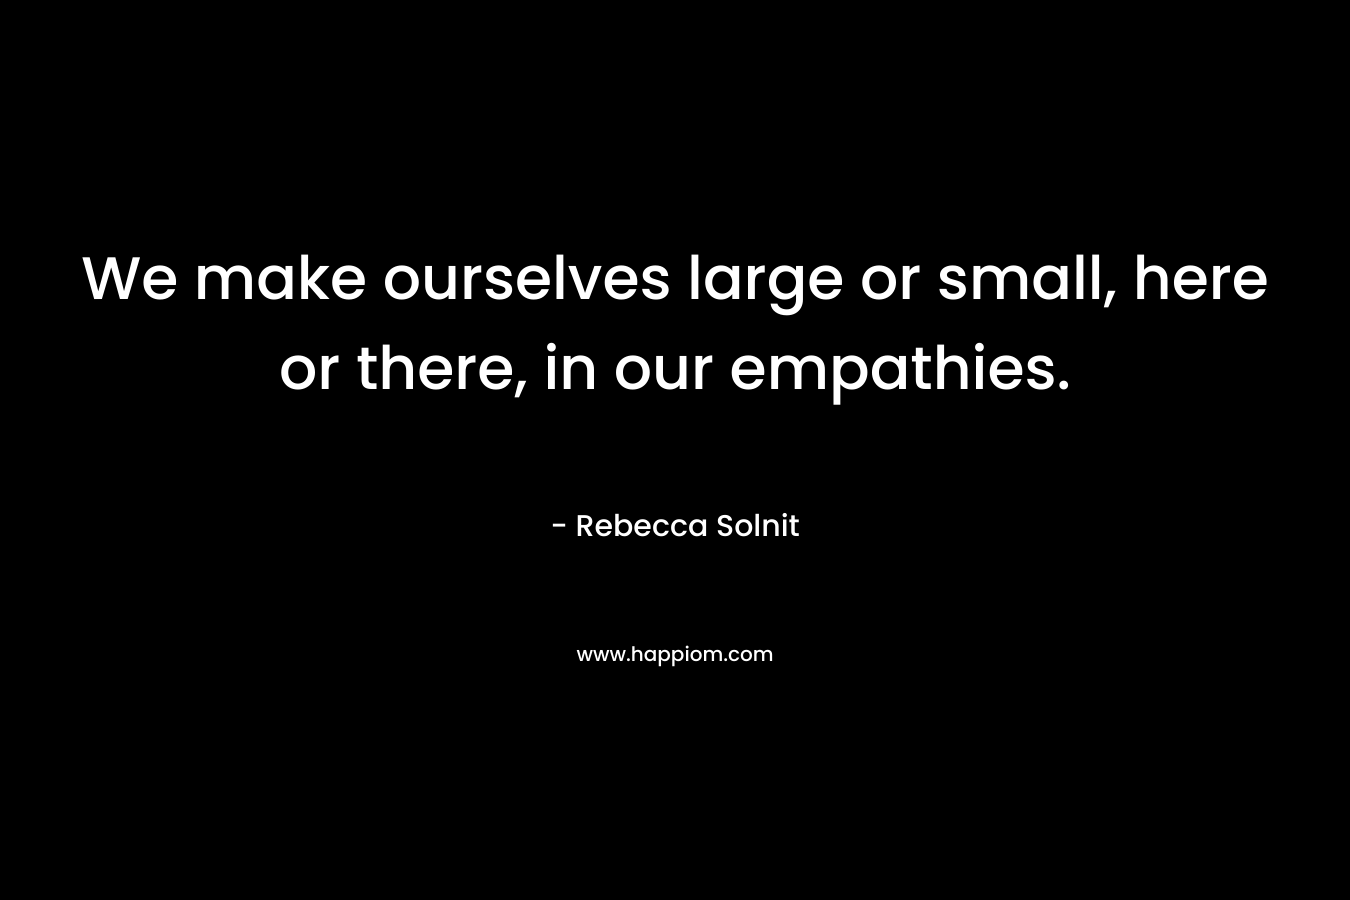 We make ourselves large or small, here or there, in our empathies.